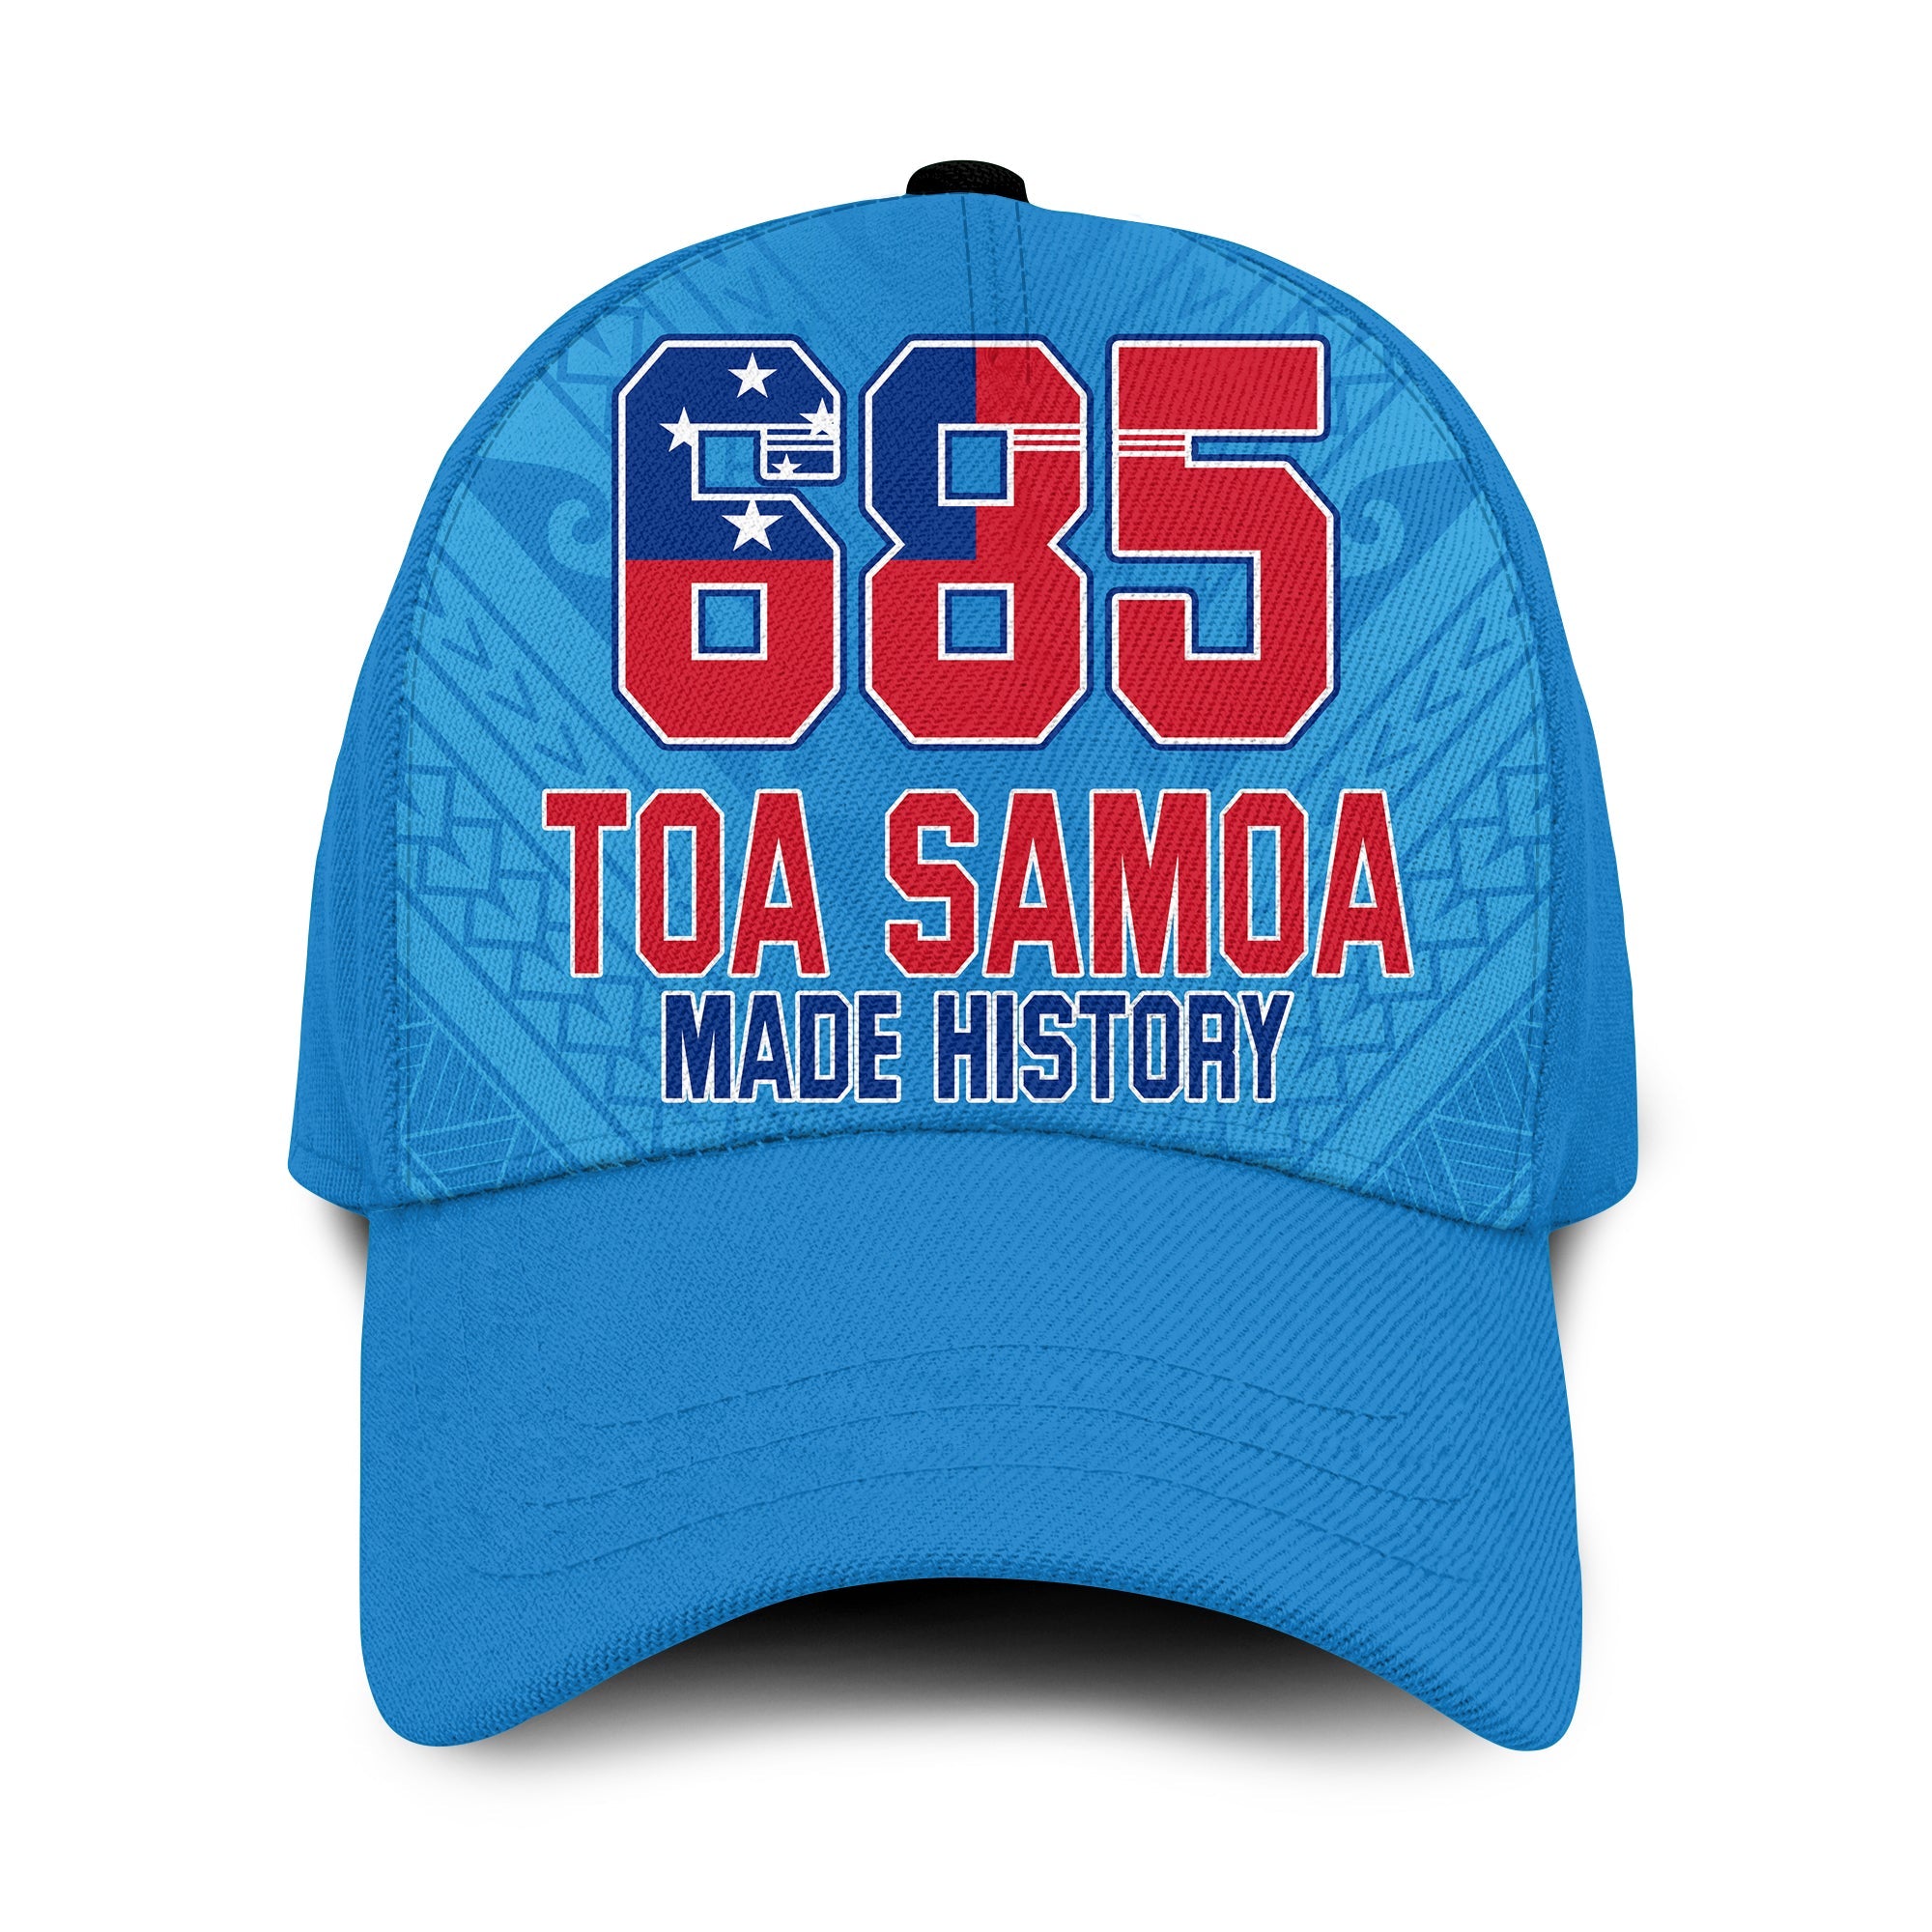 Toa Samoa Rugby Classic Cap Proud 685 Made History Blue Ver.02 LT13 Classic Cap Universal Fit Blue - Polynesian Pride